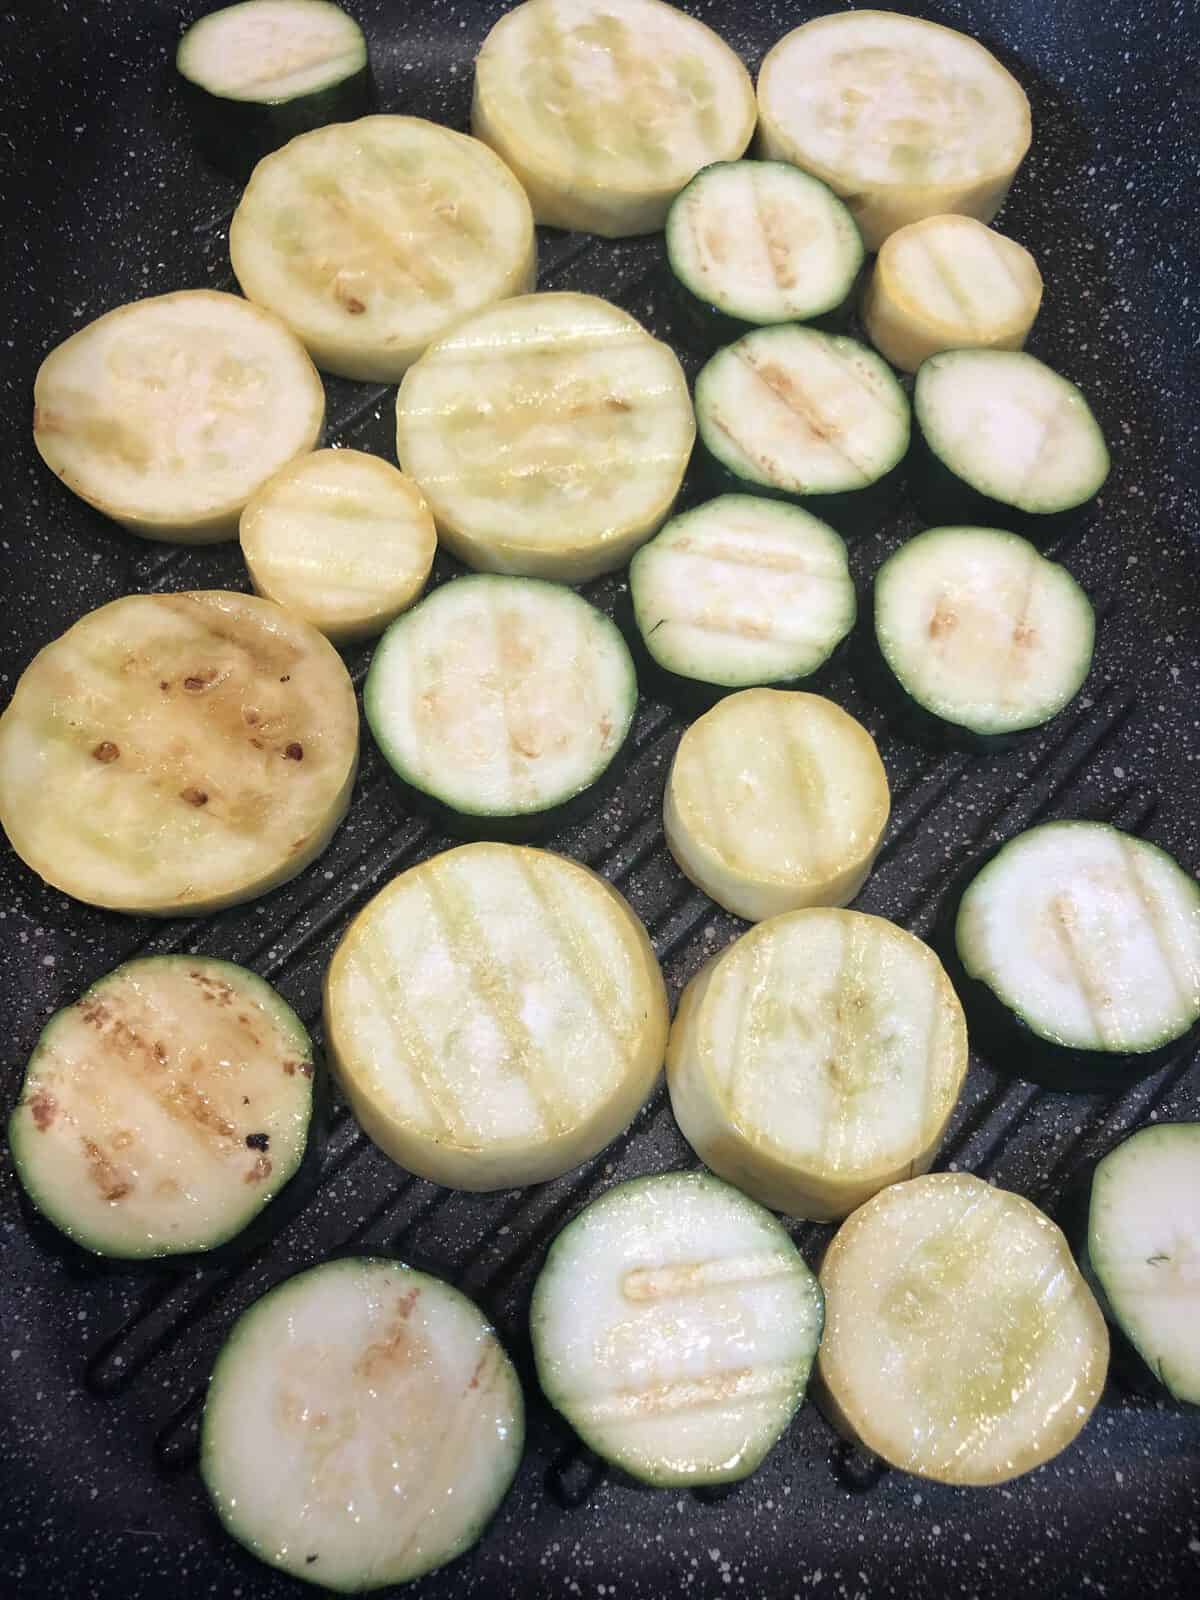 Grilling zucchini  and squash slices on an indoor grill